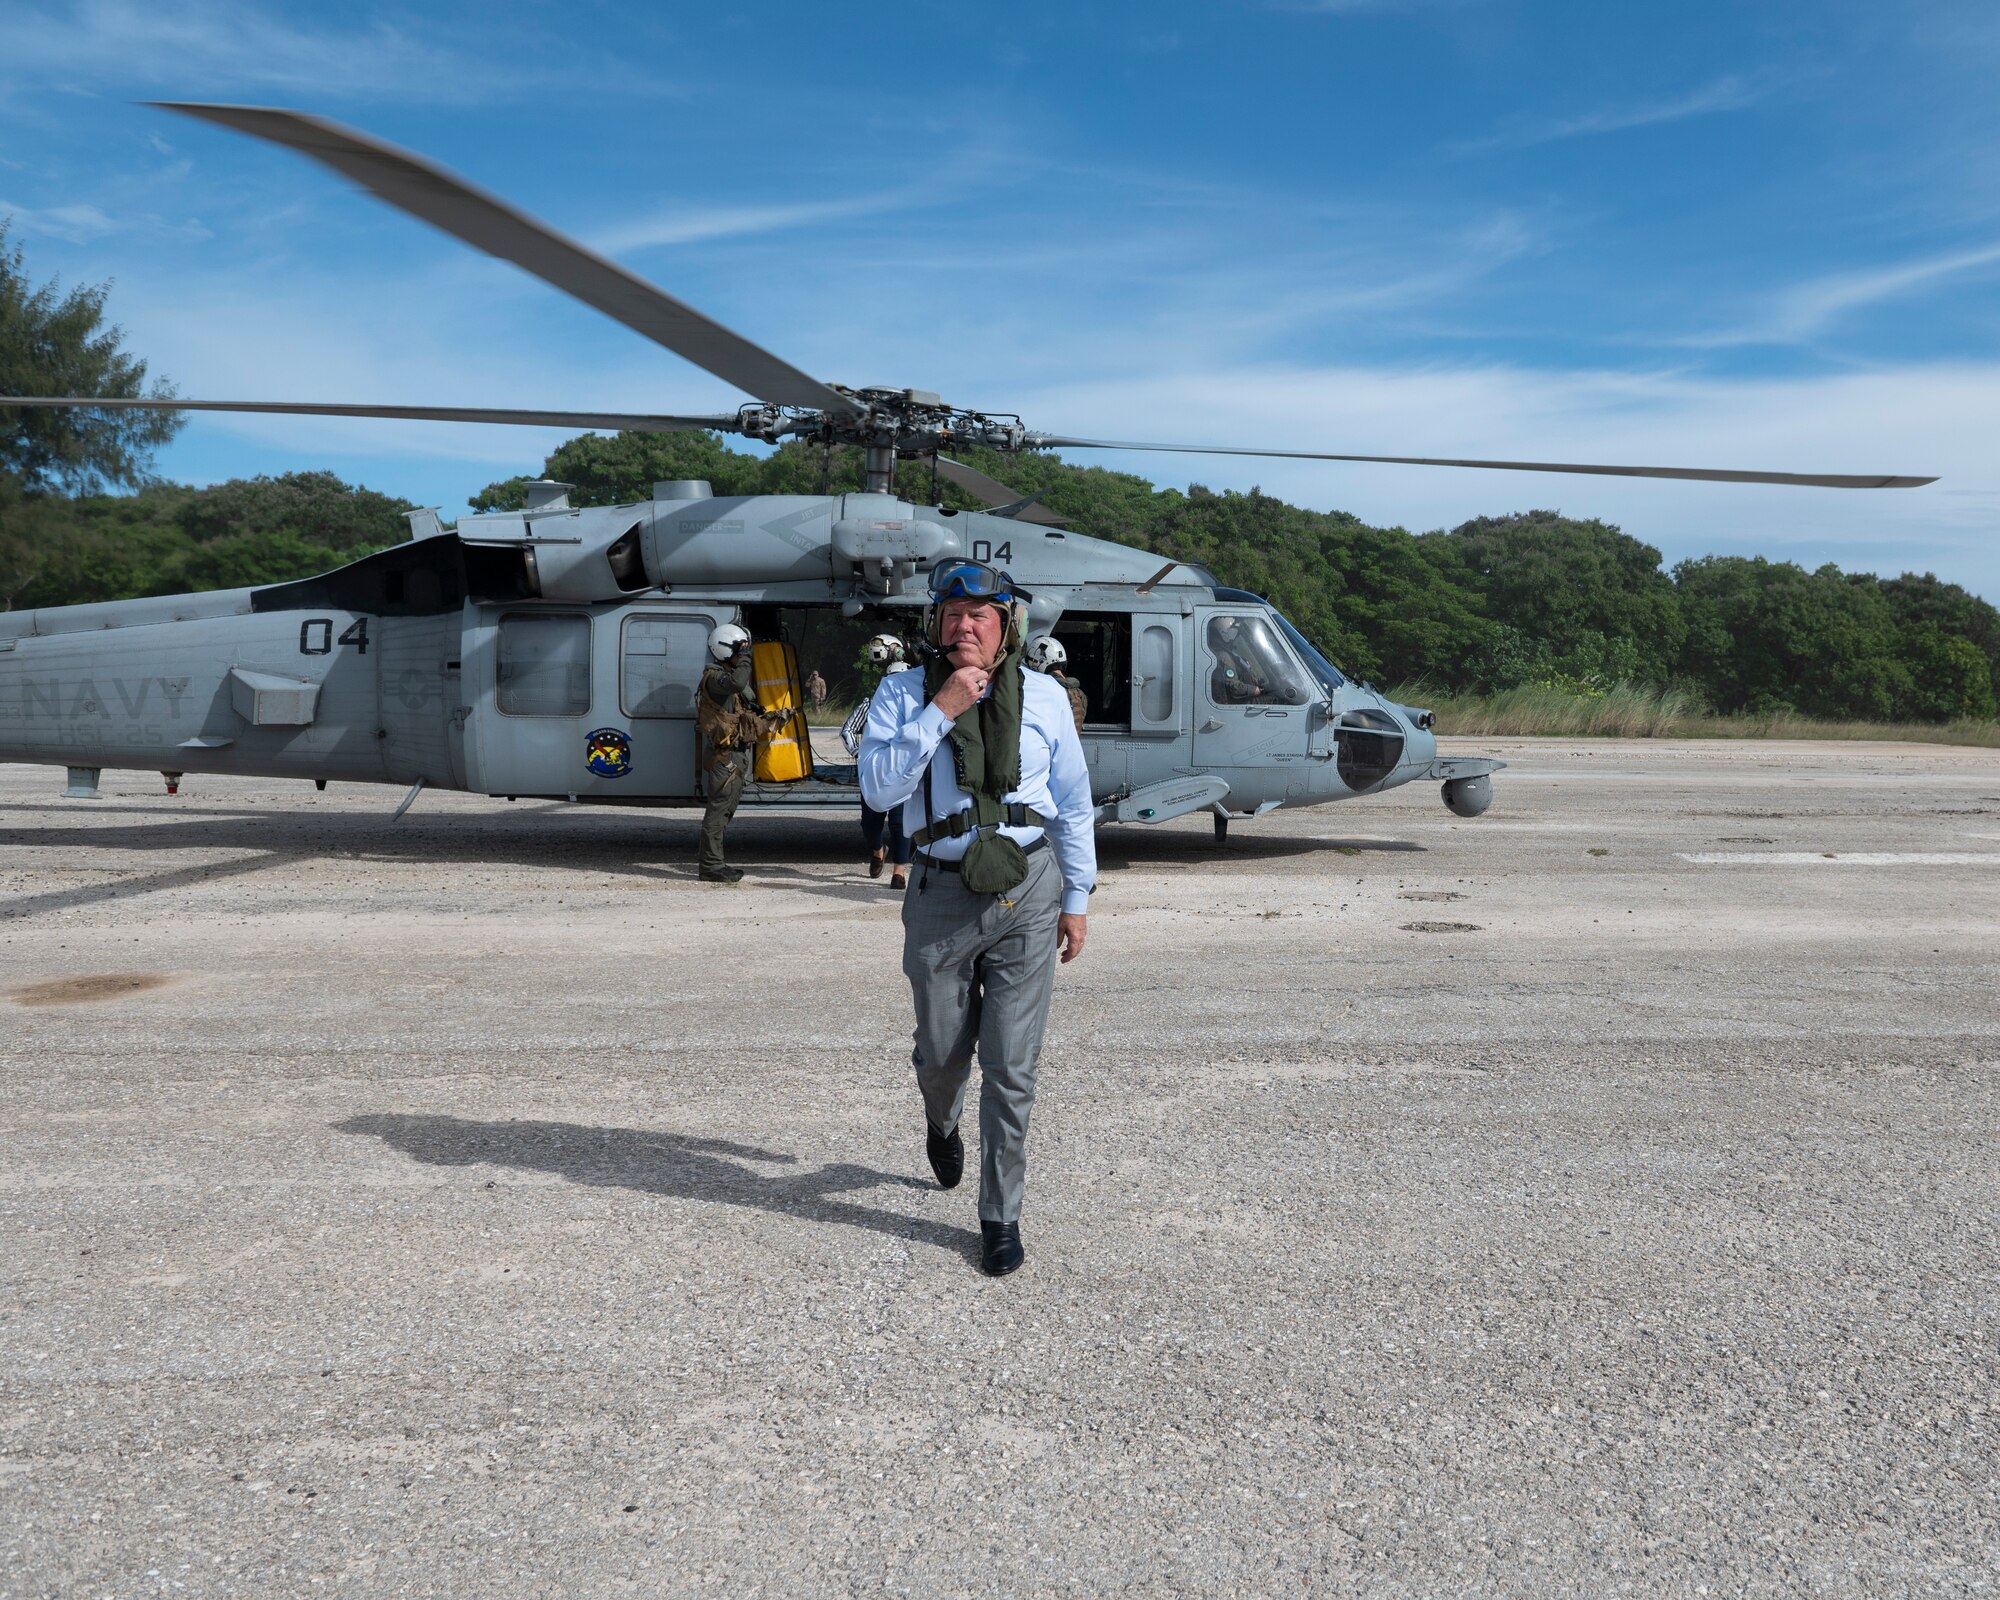 Secretary of the Air Force Frank Kendall exits a U.S. Navy MH-60S Seahawk during his visit at Andersen Air Force Base, Guam, Aug. 19, 2022.